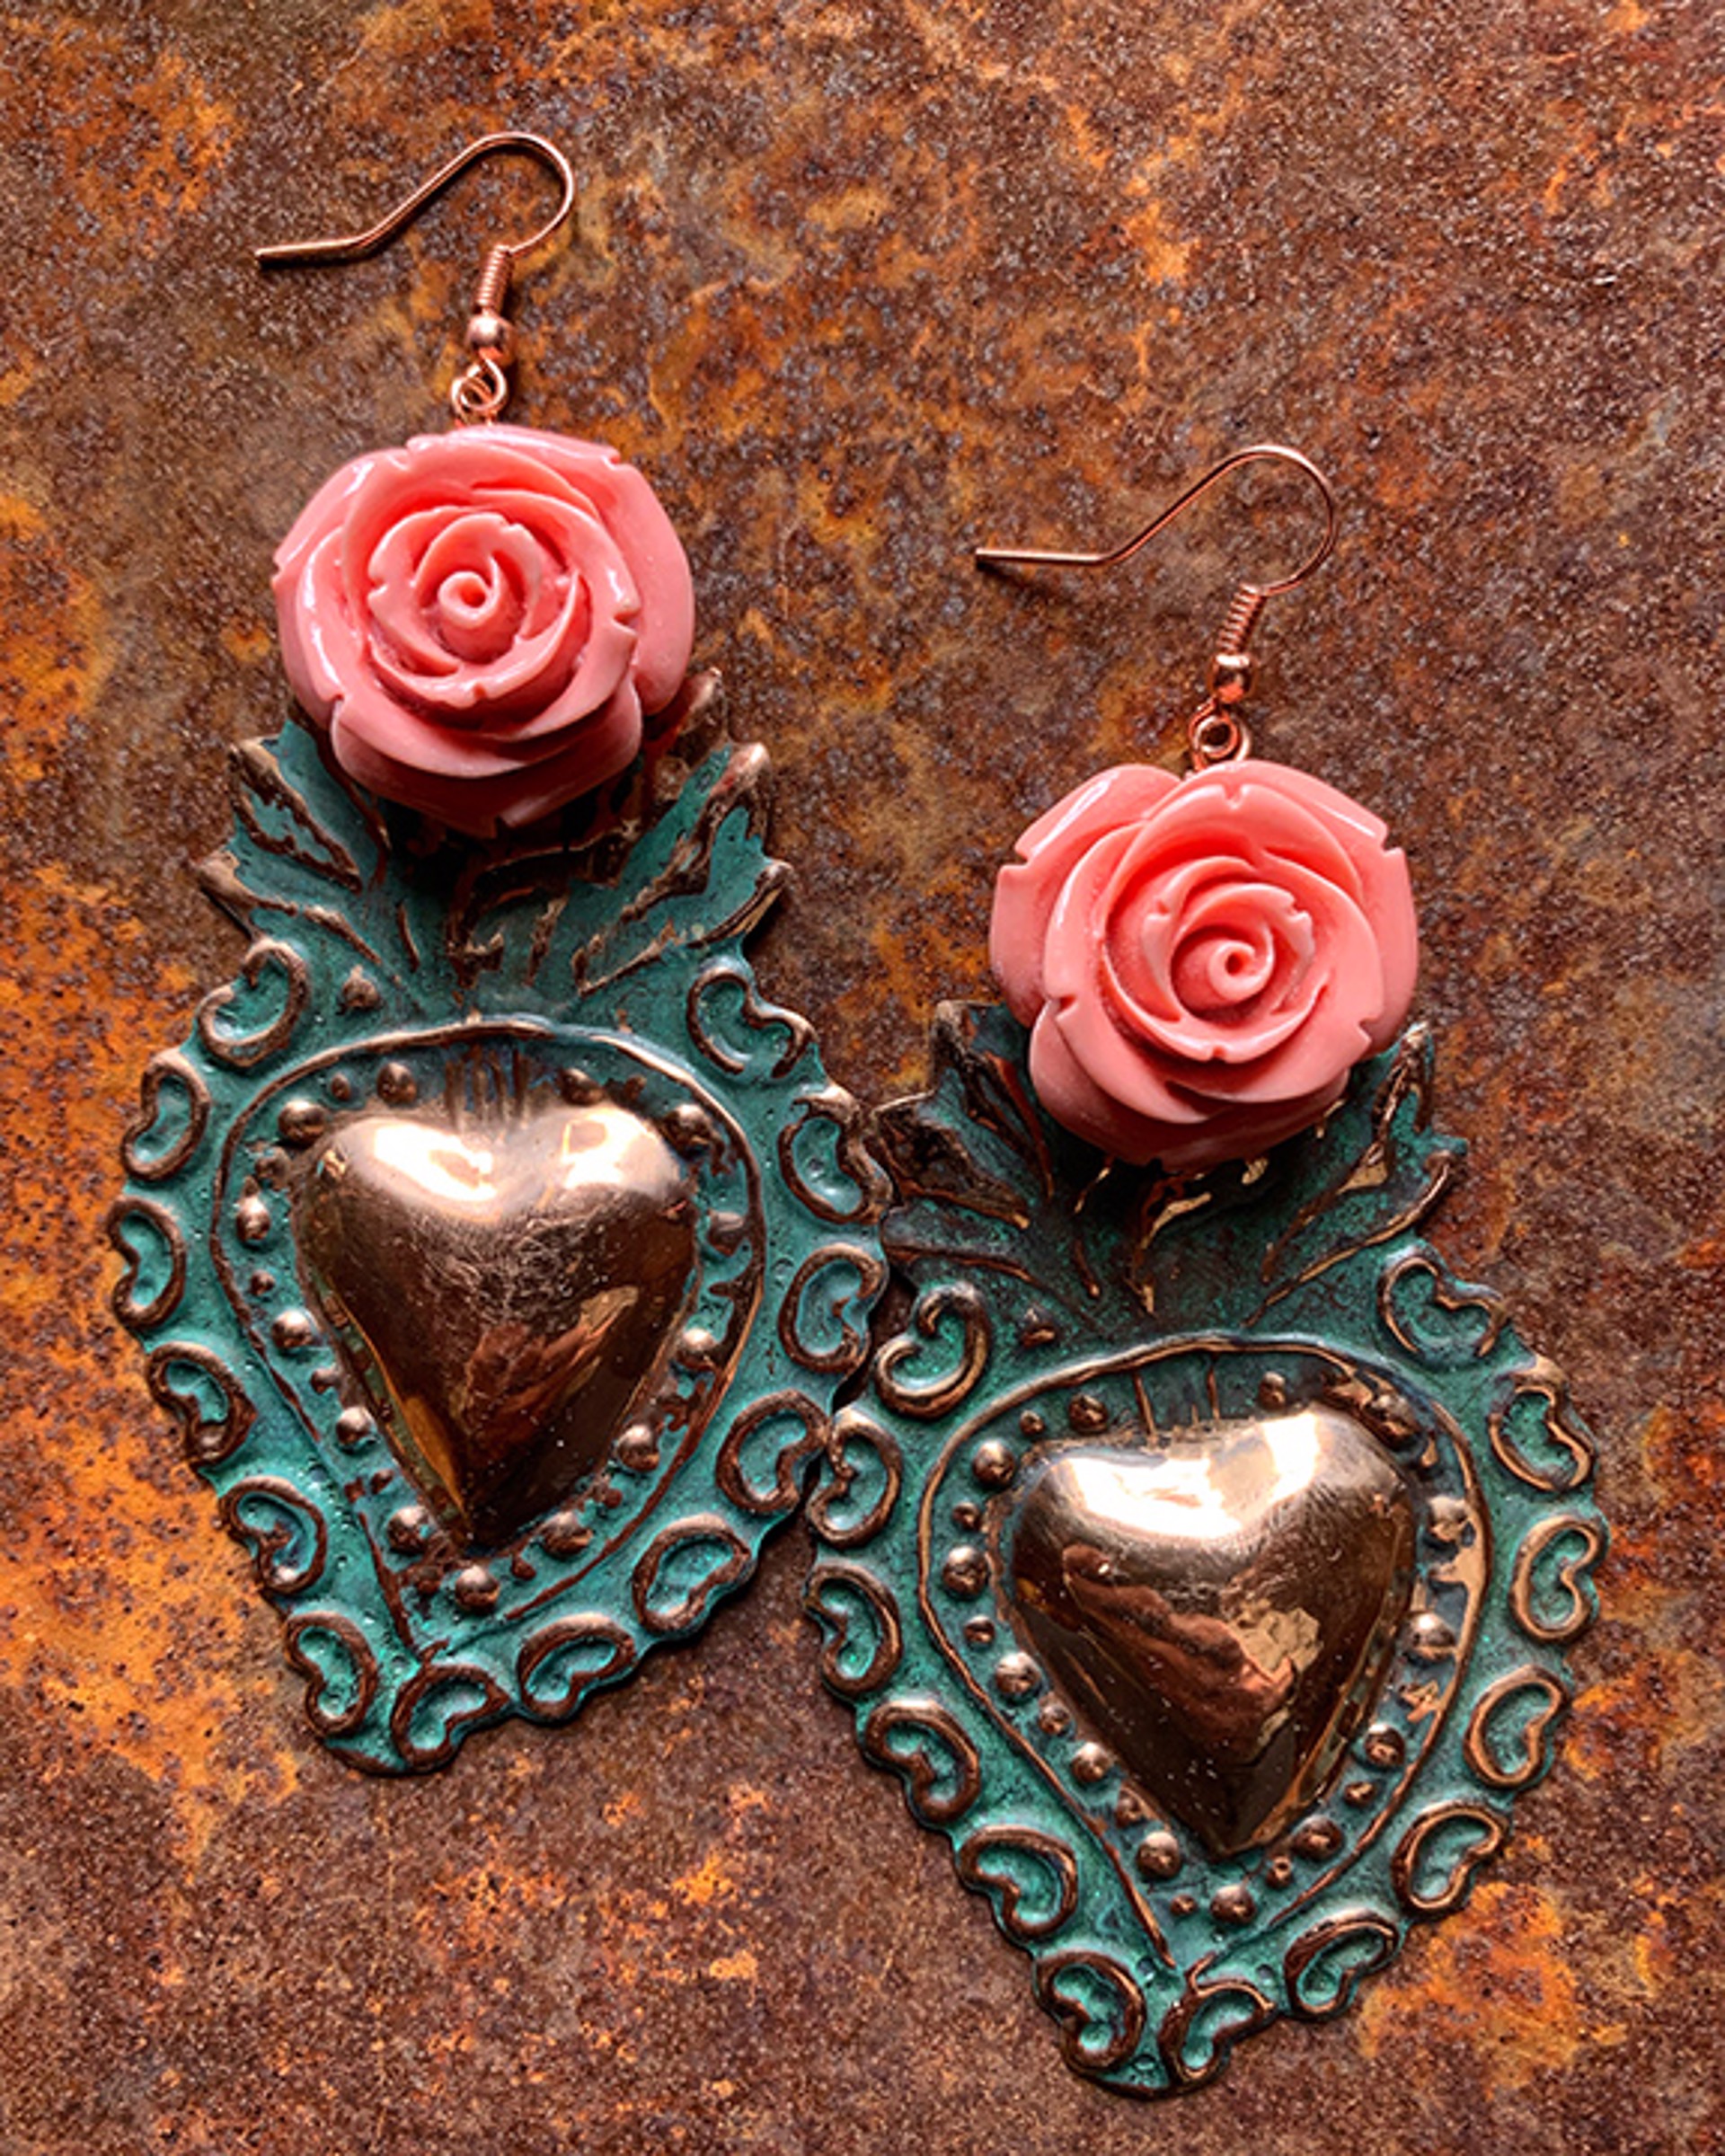 K720 XL Sacred Heart Earrings with Pink Roses by Kelly Ormsby